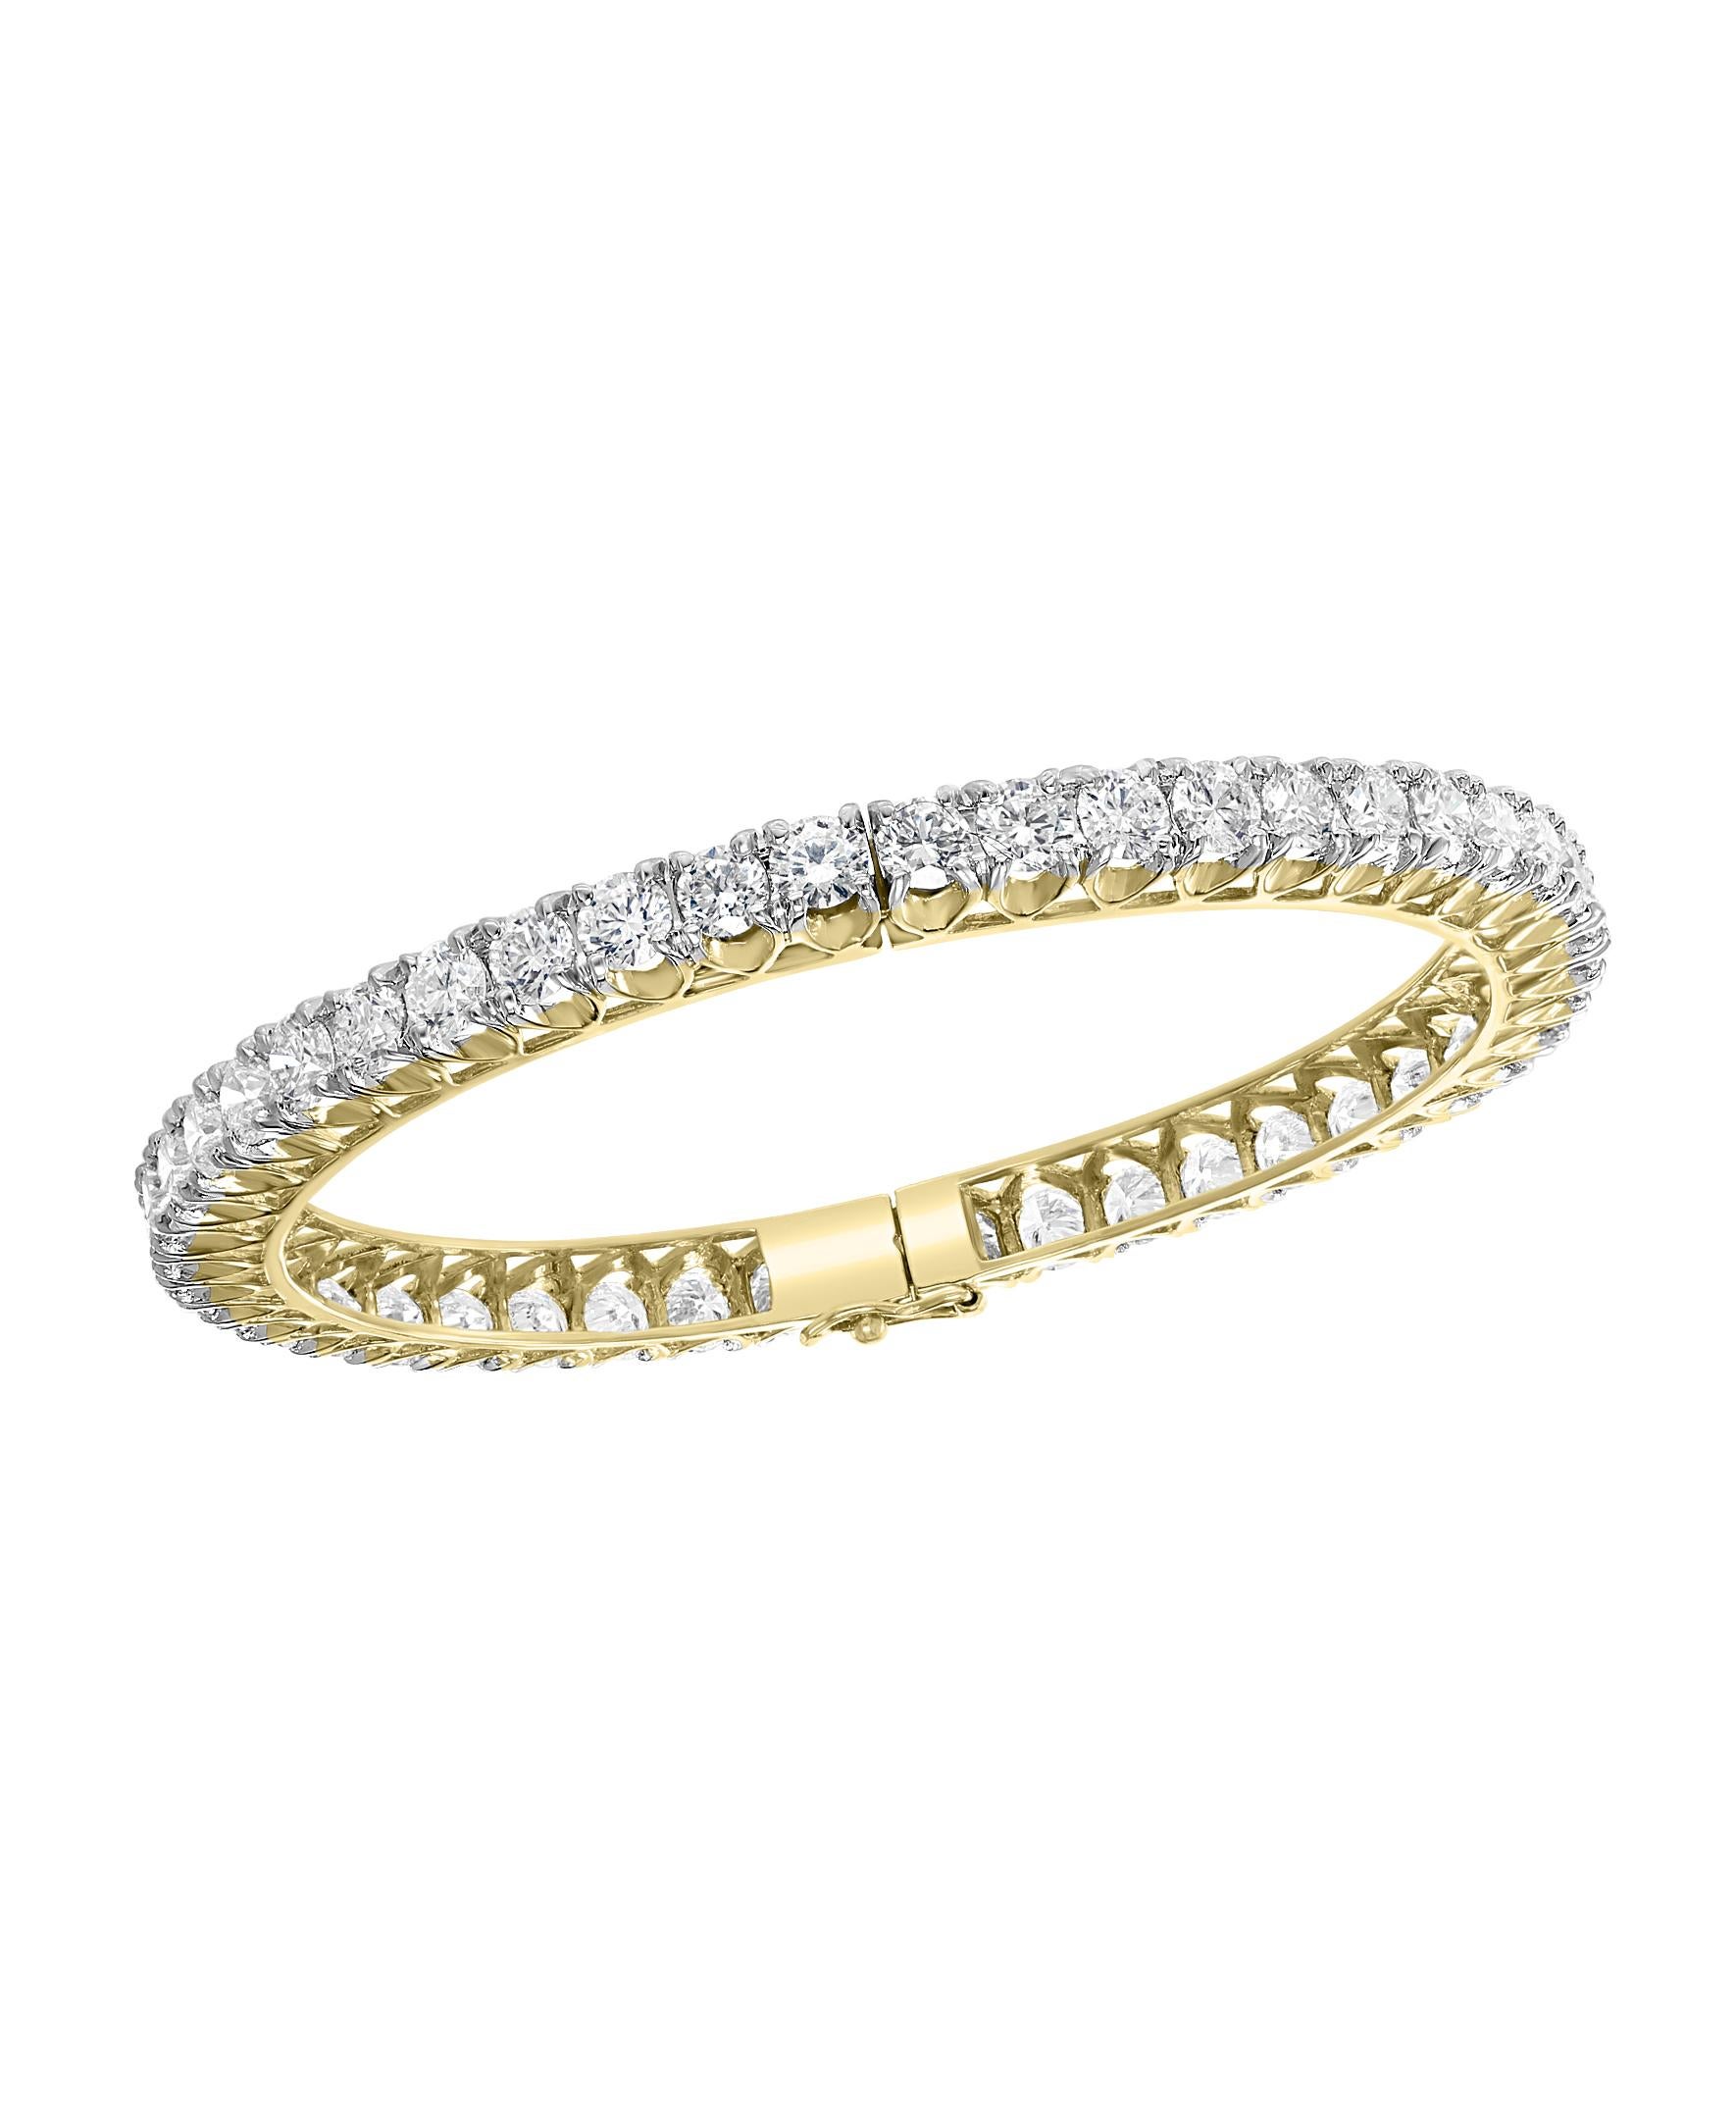 30 Pointer Each, 29 Ct Single Line Eternity 18 Kt Gold and Diamond Bangle, Pair In Excellent Condition For Sale In New York, NY